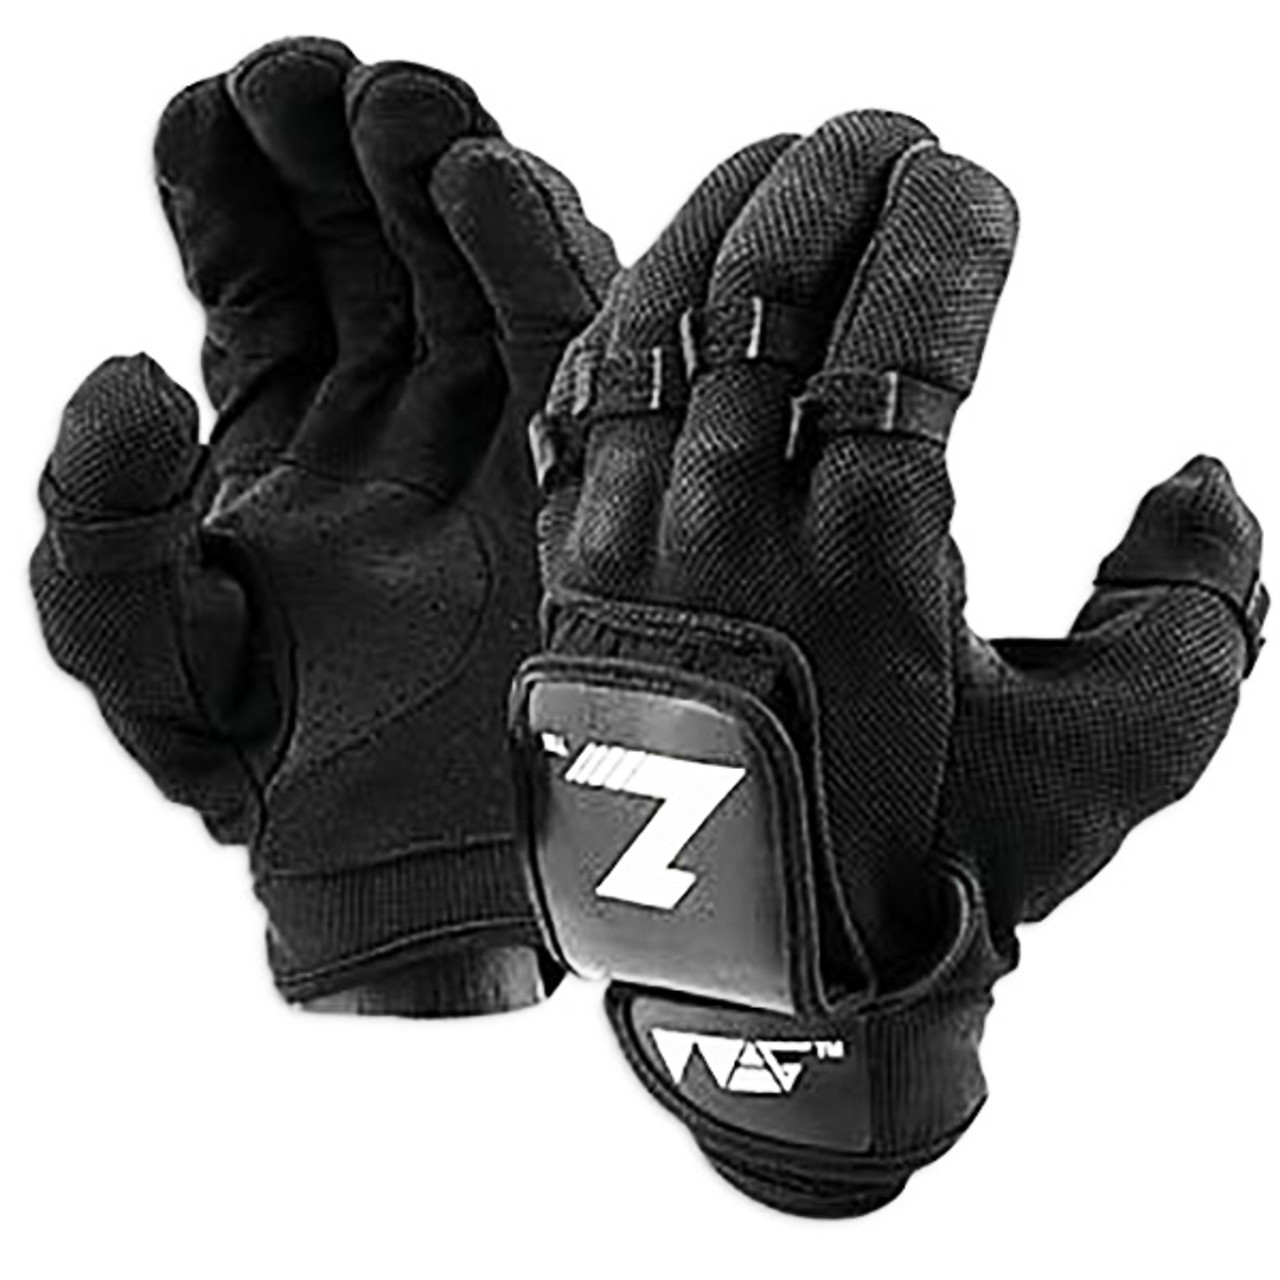 Details about   Weighted DRAZ Agility Gloves  Men's Size  S  Black full fingered Tough Grip New 